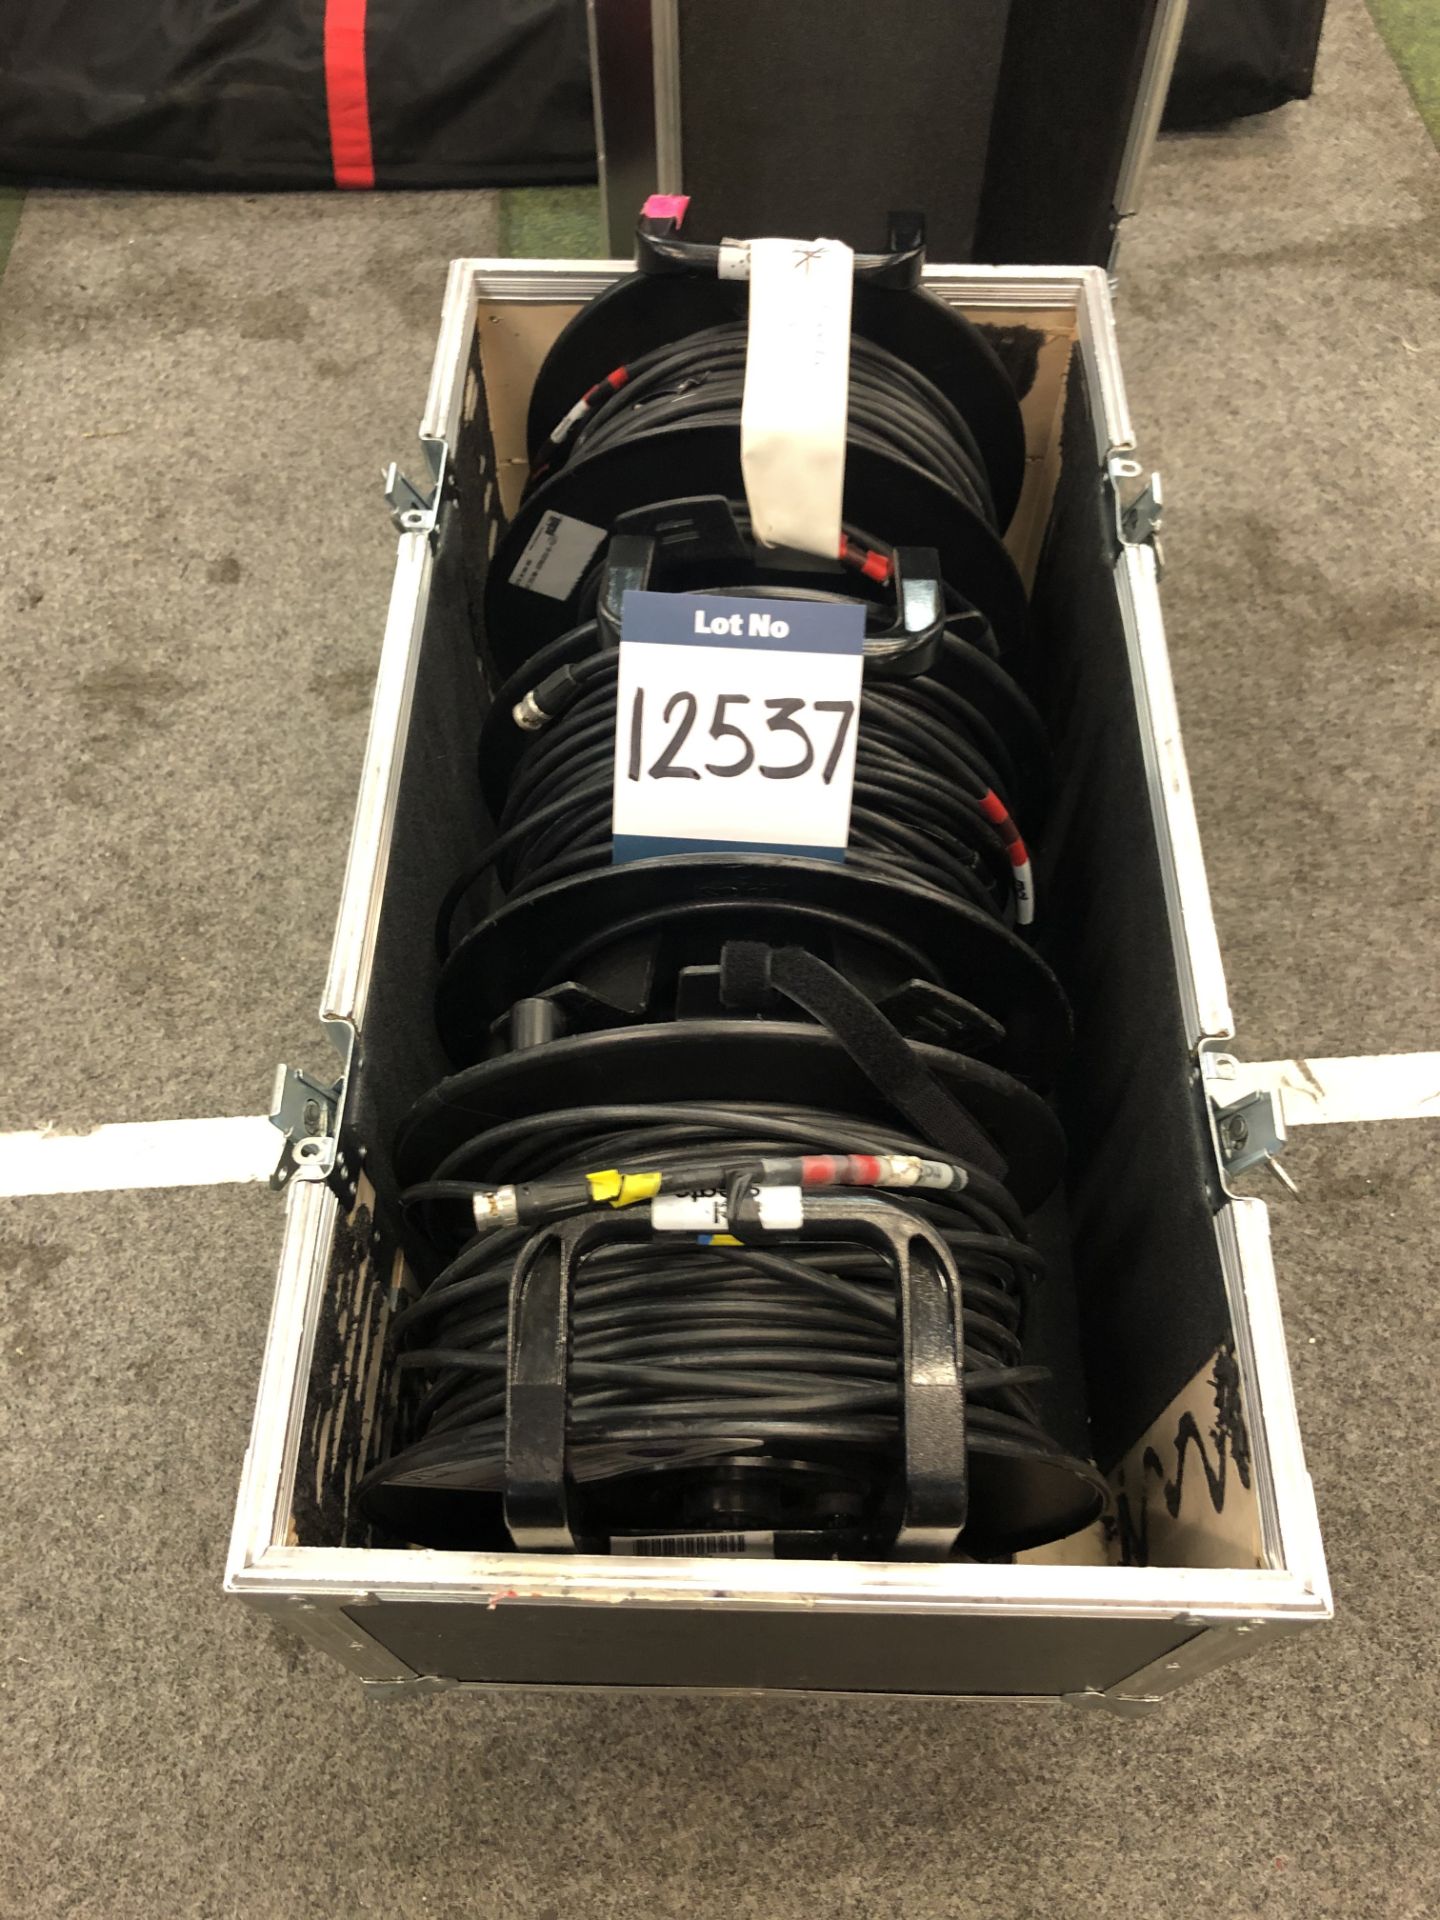 3x No. 50m SDI cable reels in transit case